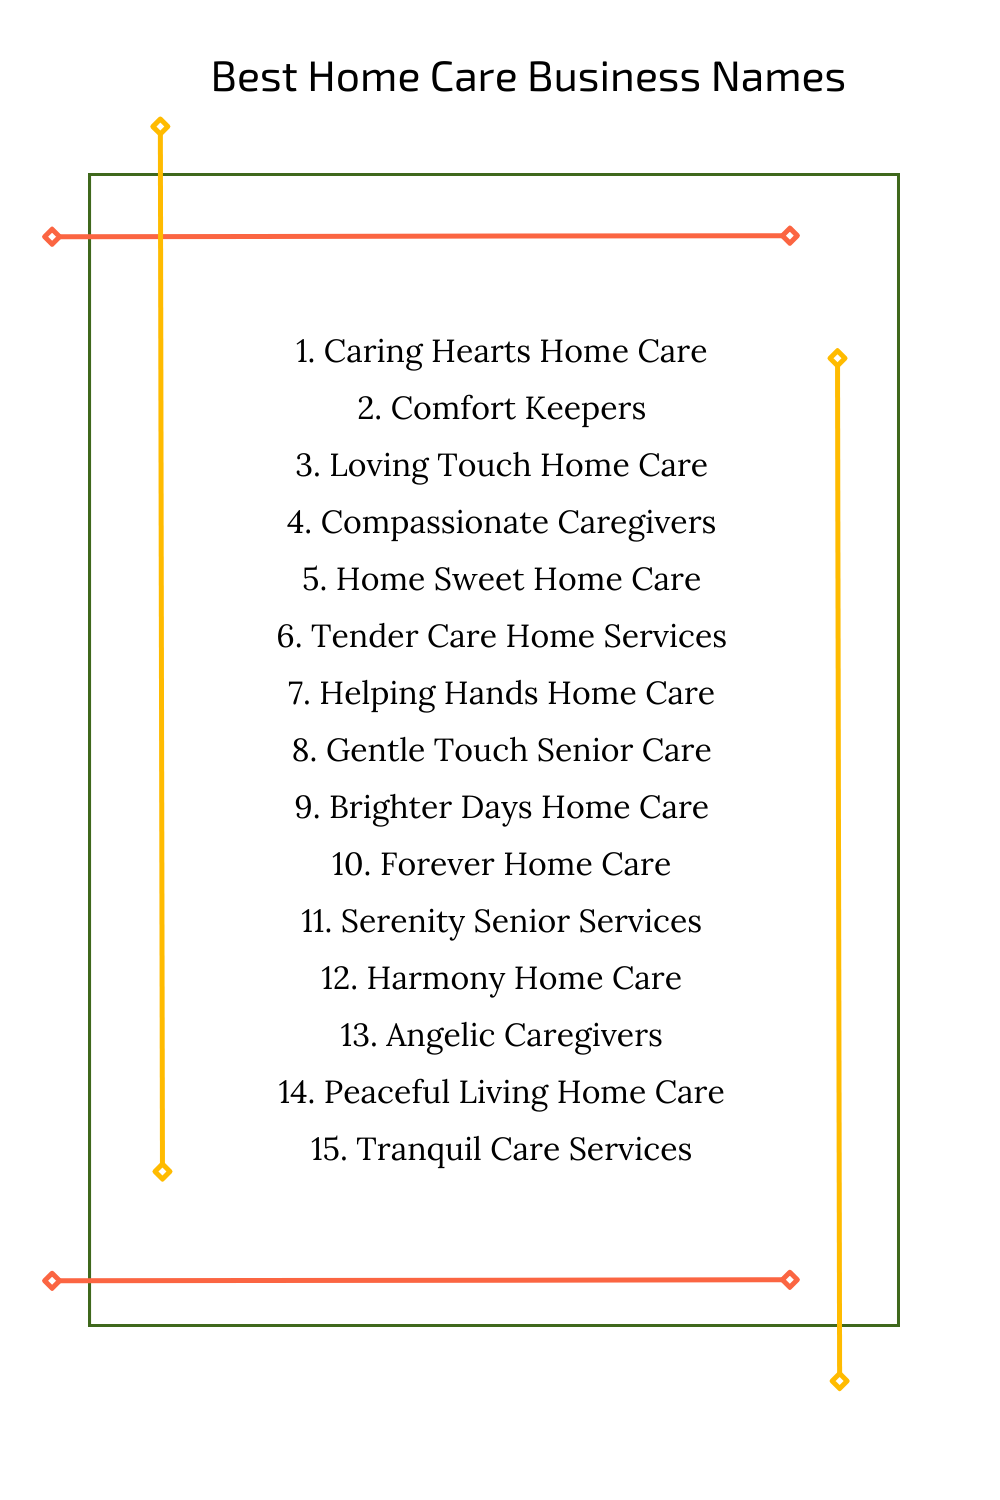 Best Home Care Business Names